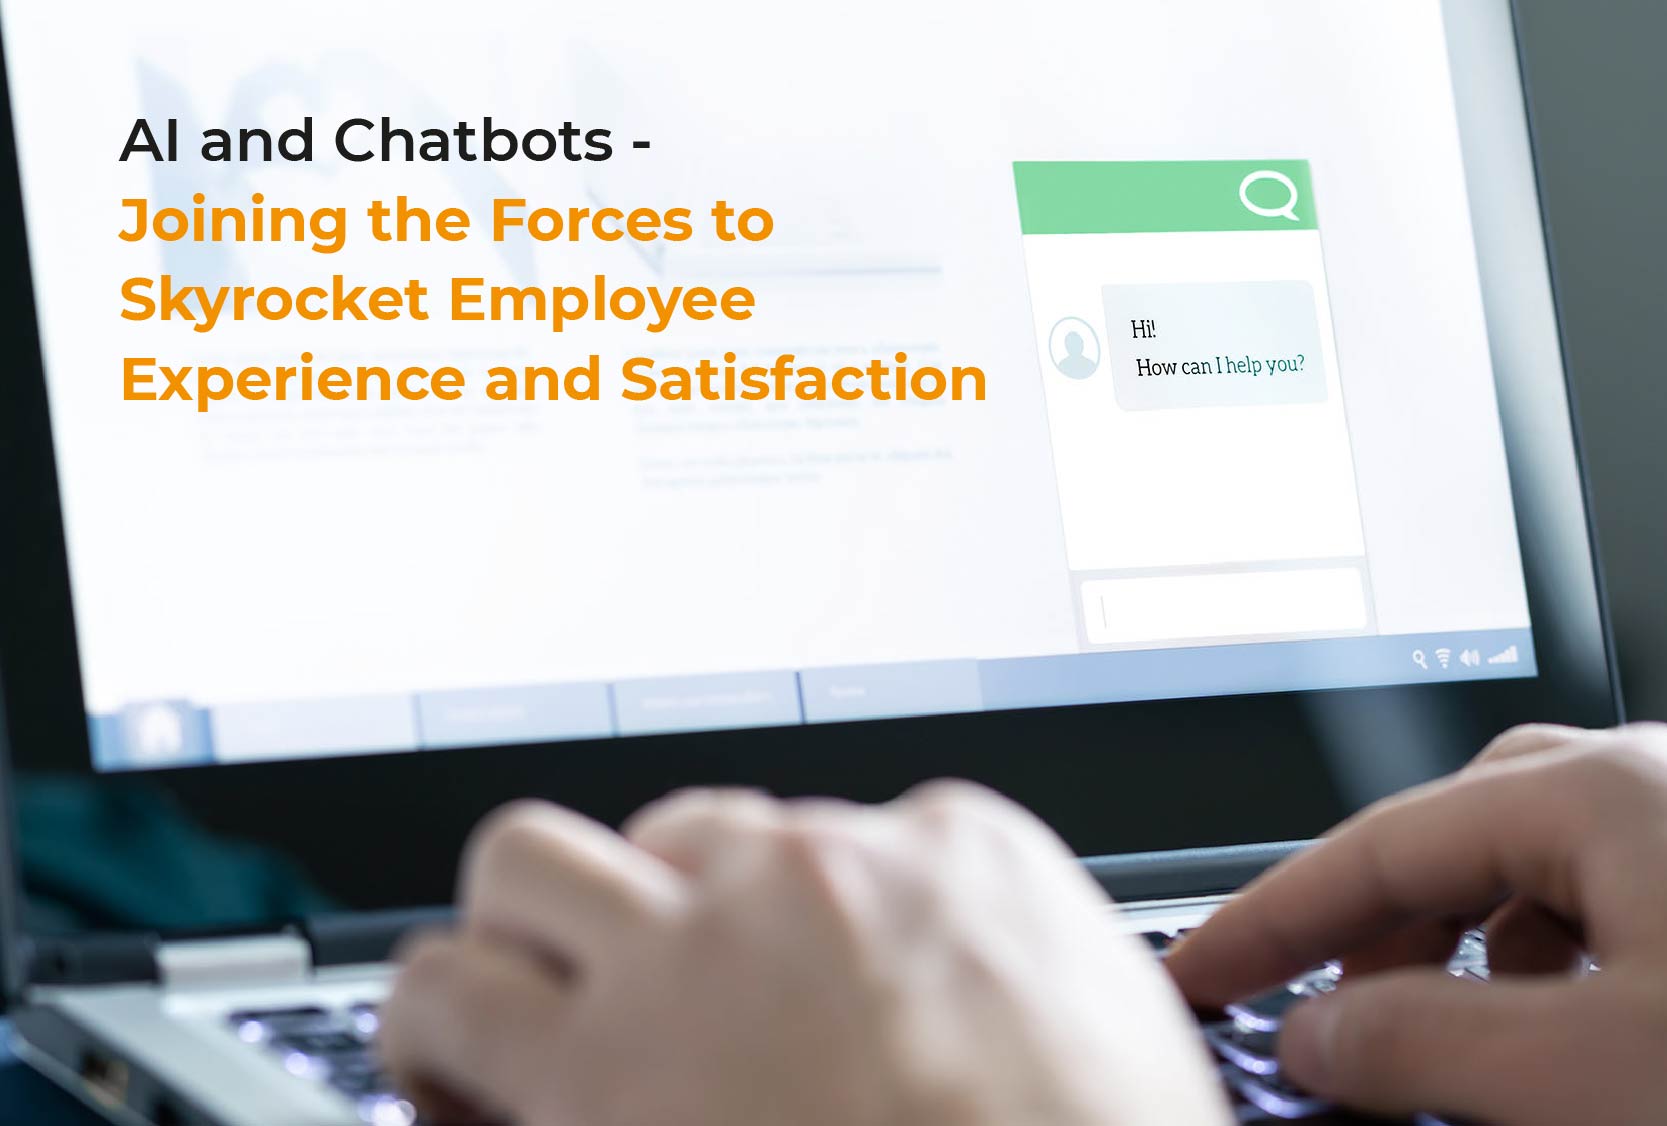 AI and Chatbots- Joining the Forces to Skyrocket Employee Experience and Satisfaction